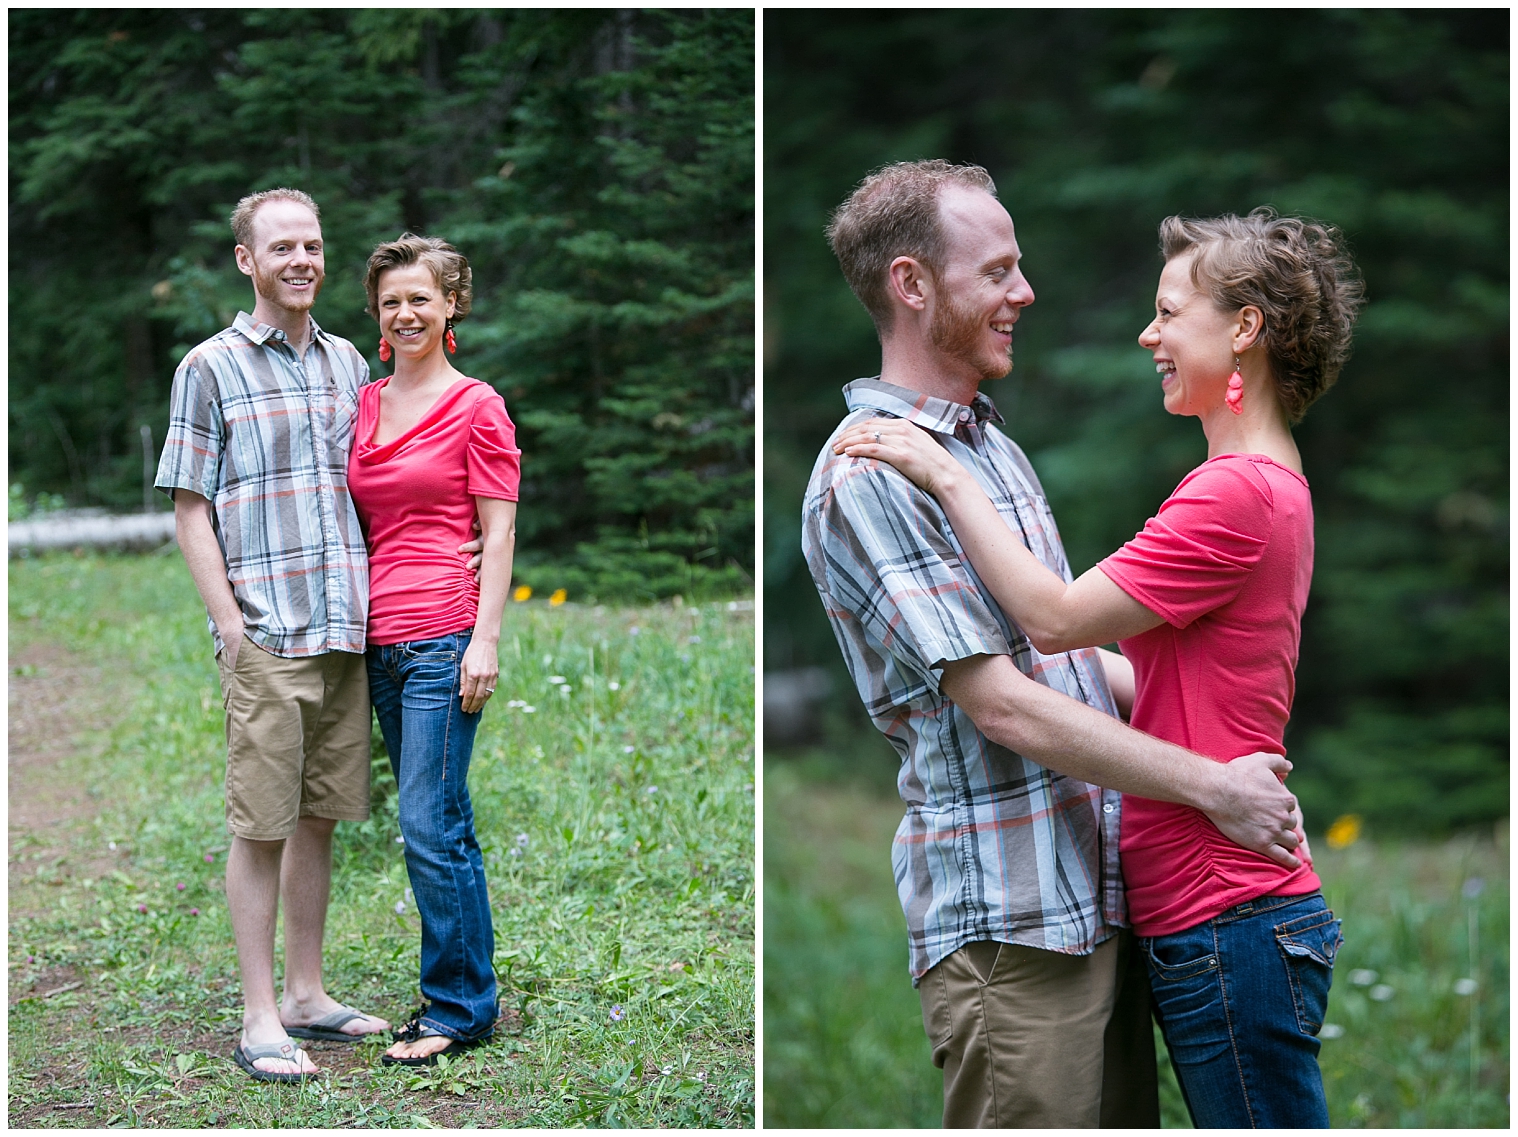 At a Breckenridge extended family photography session, couple poses together. 